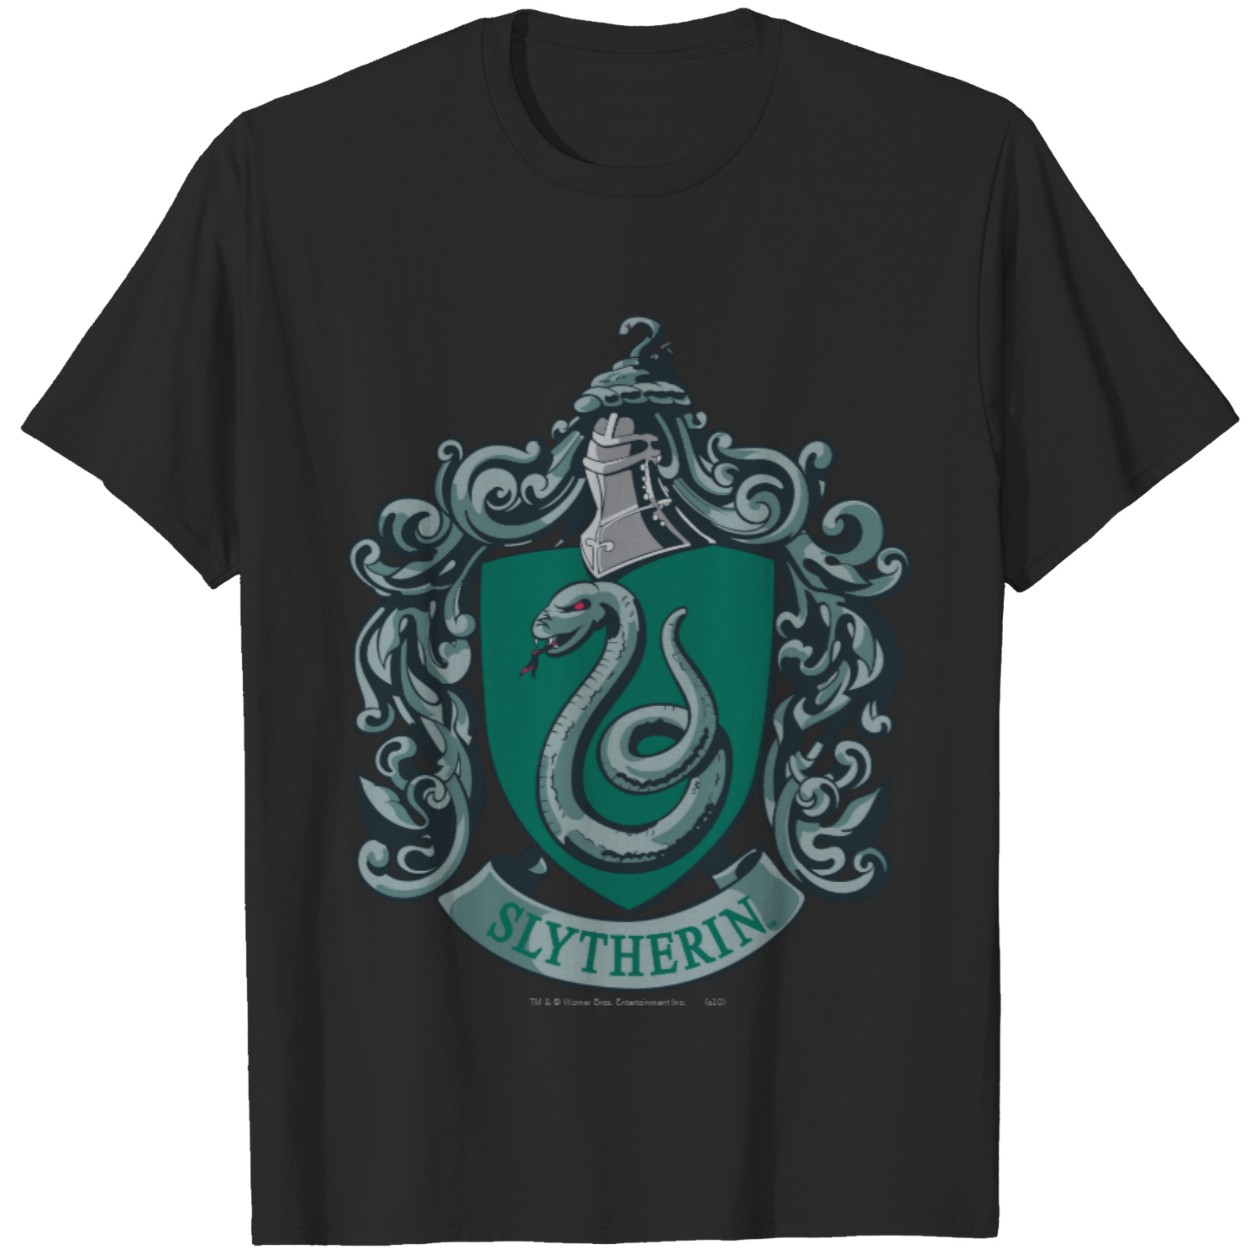 Stylish Slytherin Crest Green T-Shirt for Harry Potter Fans IYT